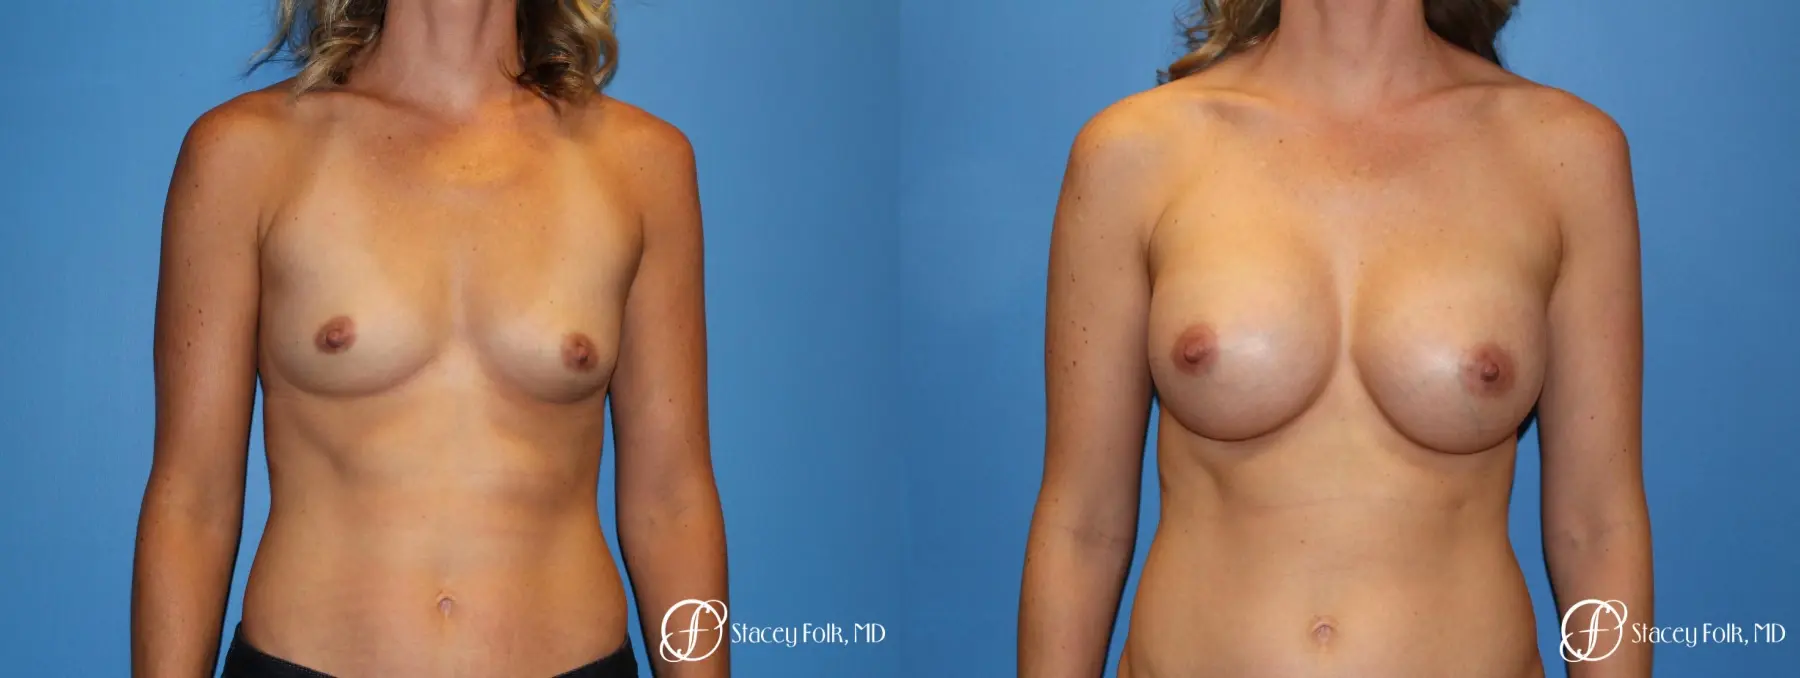 Denver Breast augmentation 4740 - Before and After